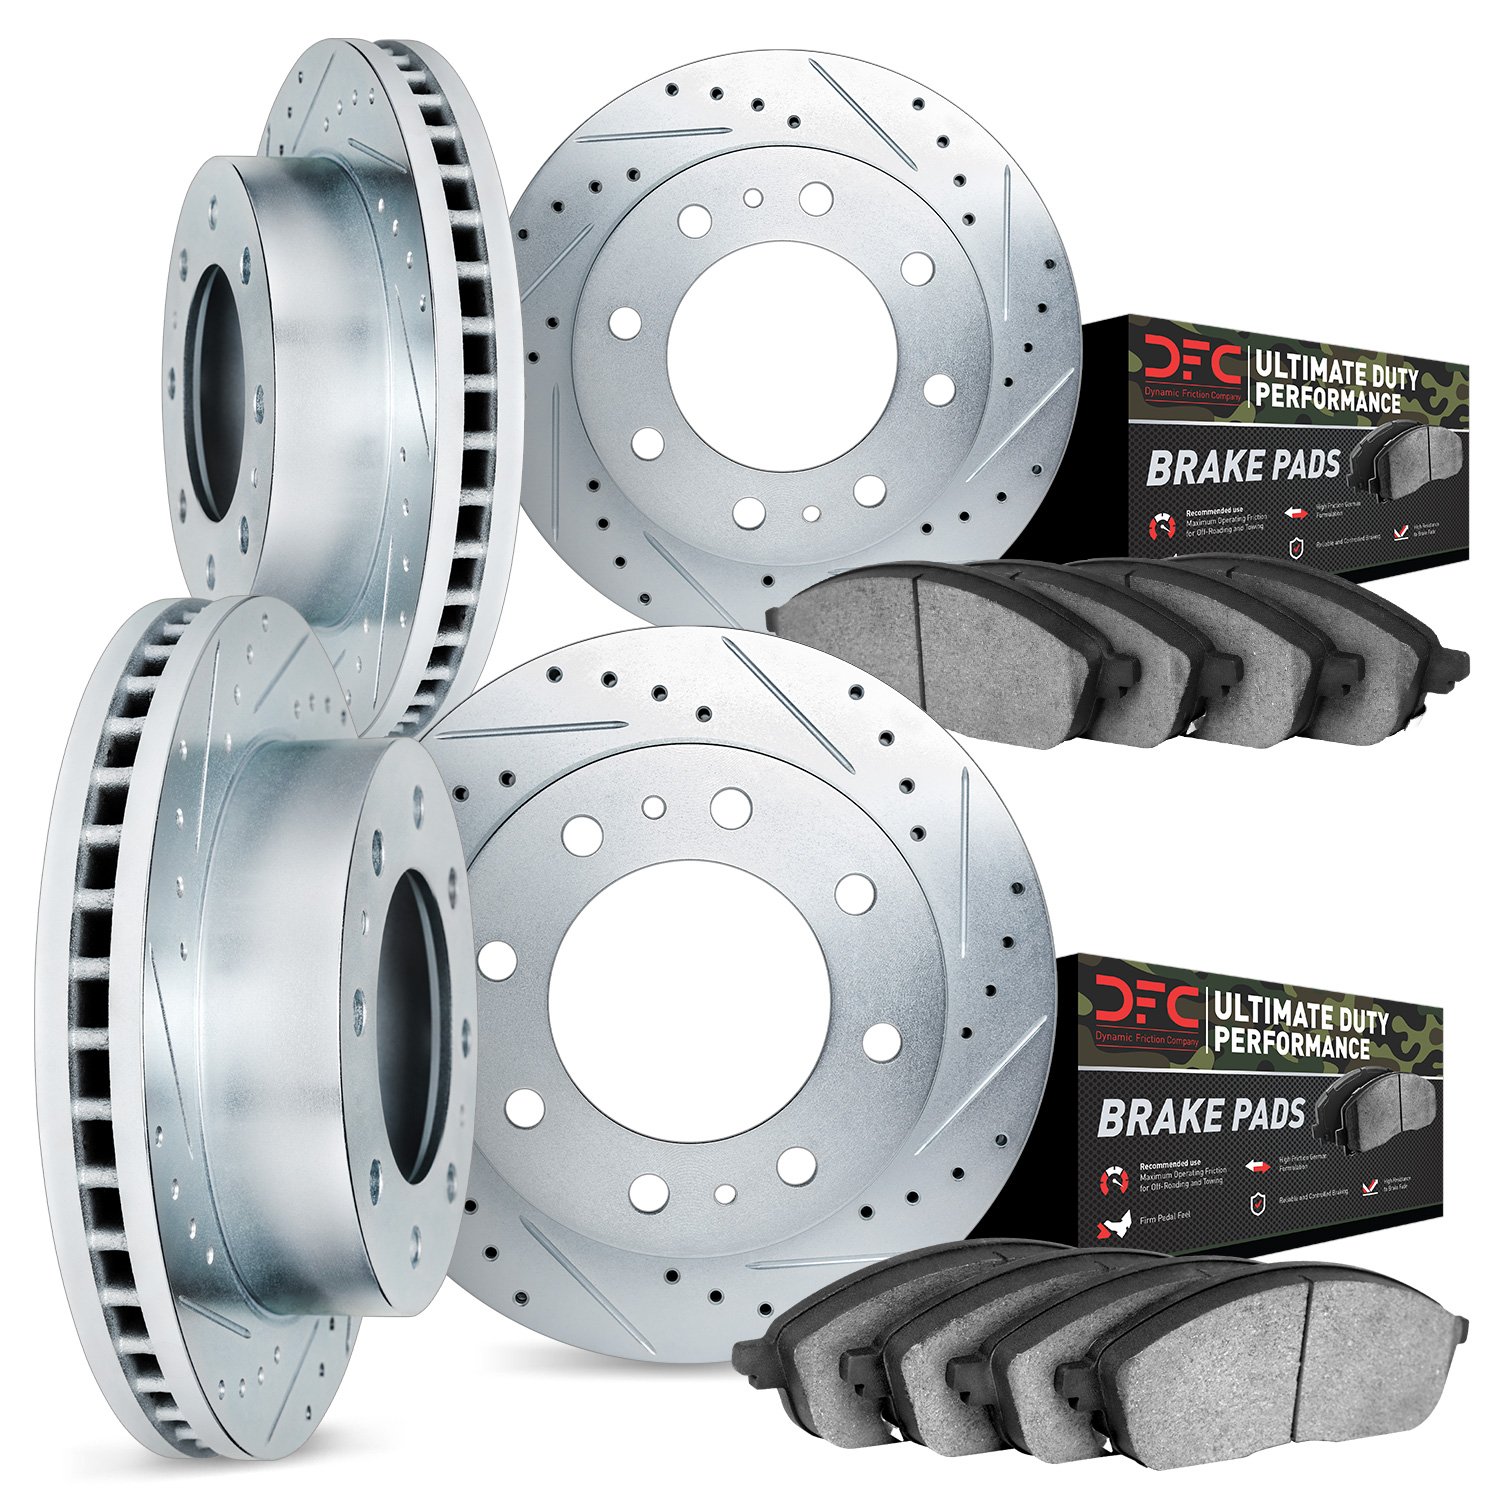 7404-46001 Drilled/Slotted Brake Rotors with Ultimate-Duty Brake Pads Kit [Silver], 2006-2011 GM, Position: Front and Rear